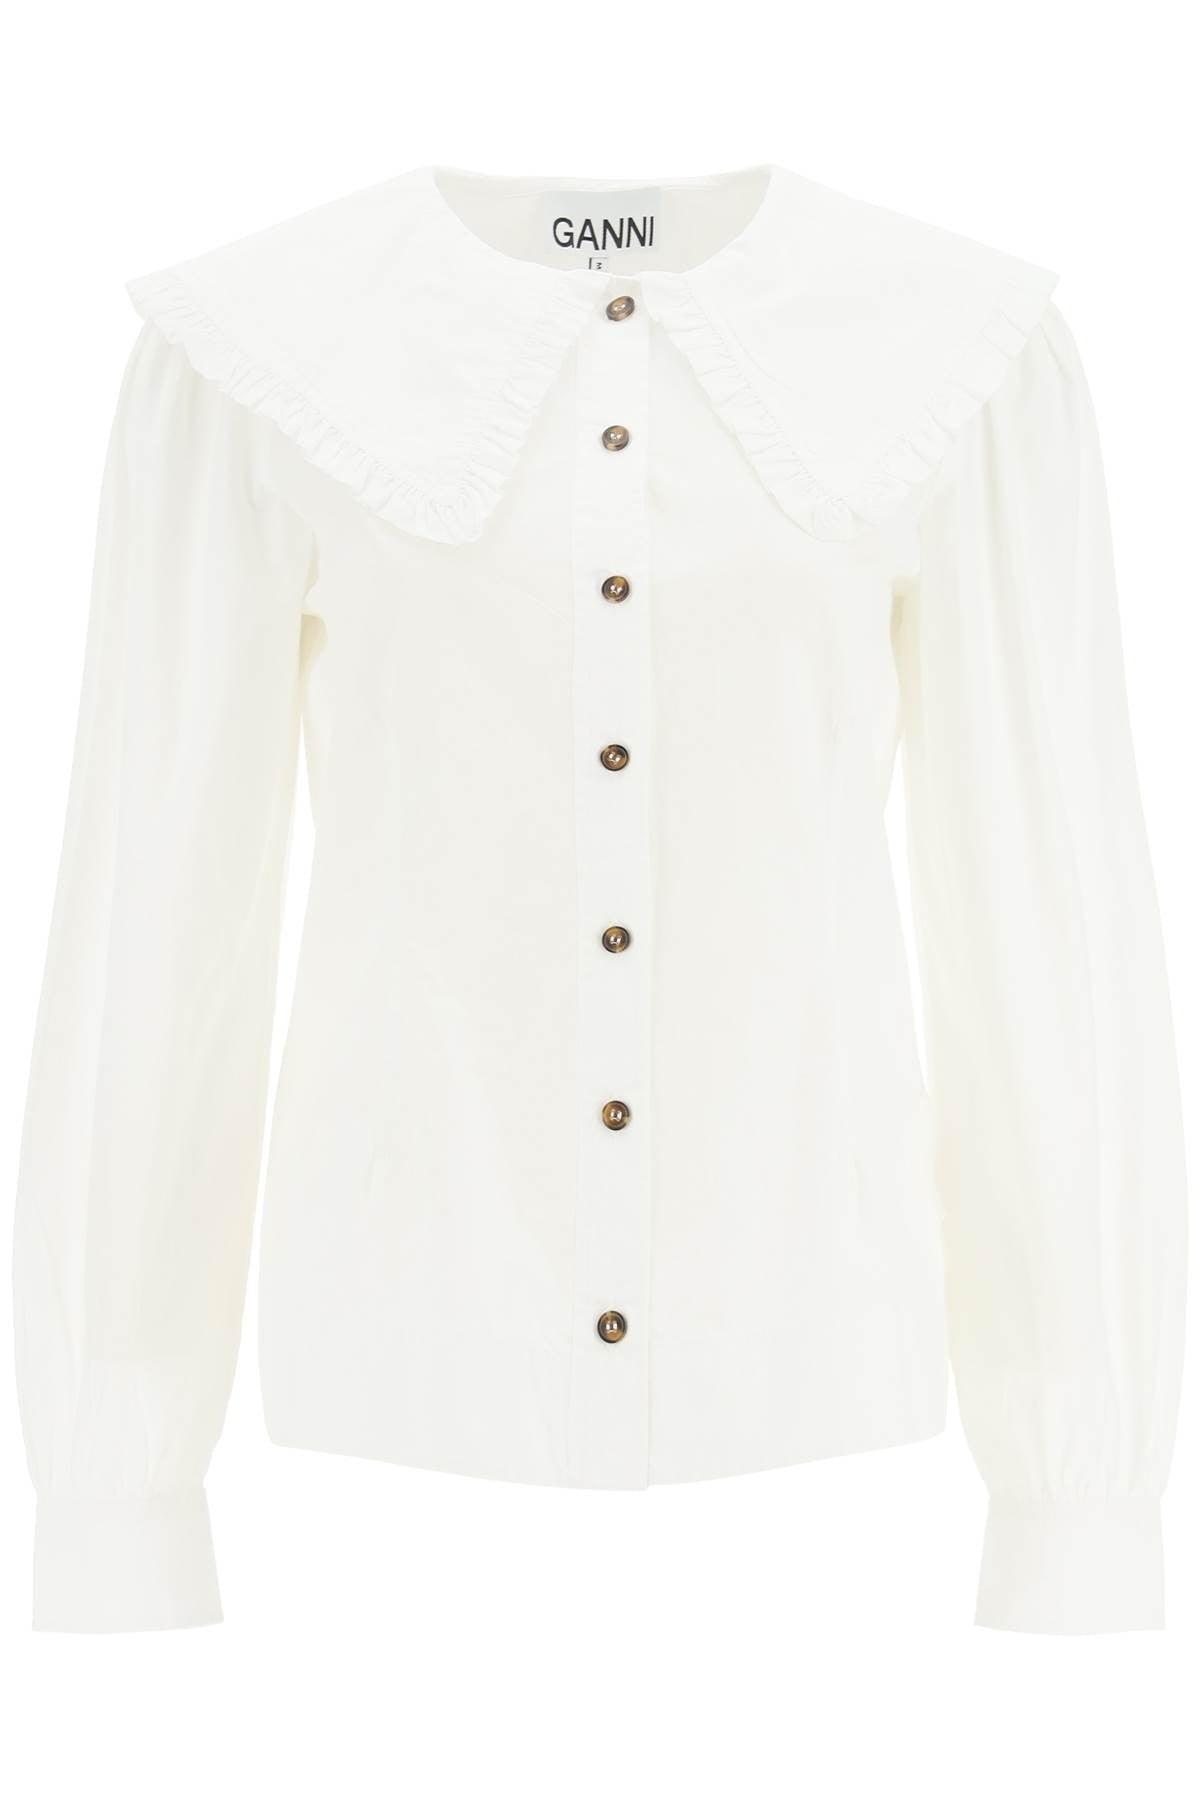 Ganni Cotton Shirt With Oversized Collar in White | Lyst UK